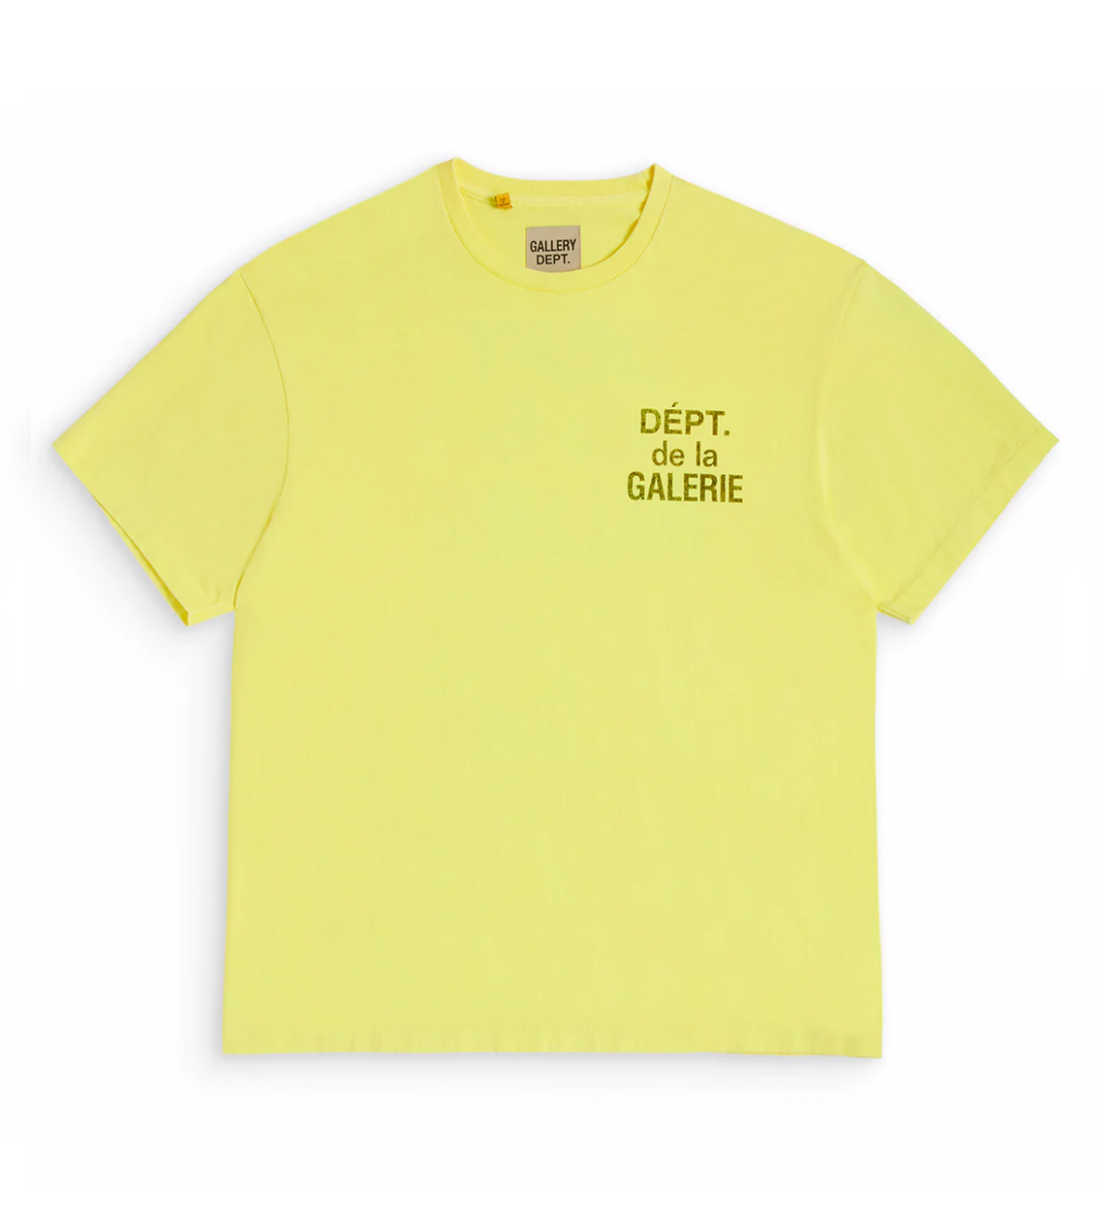 Gallery Dept. French Souvenir Flo Neon Yellow Tee, Front View